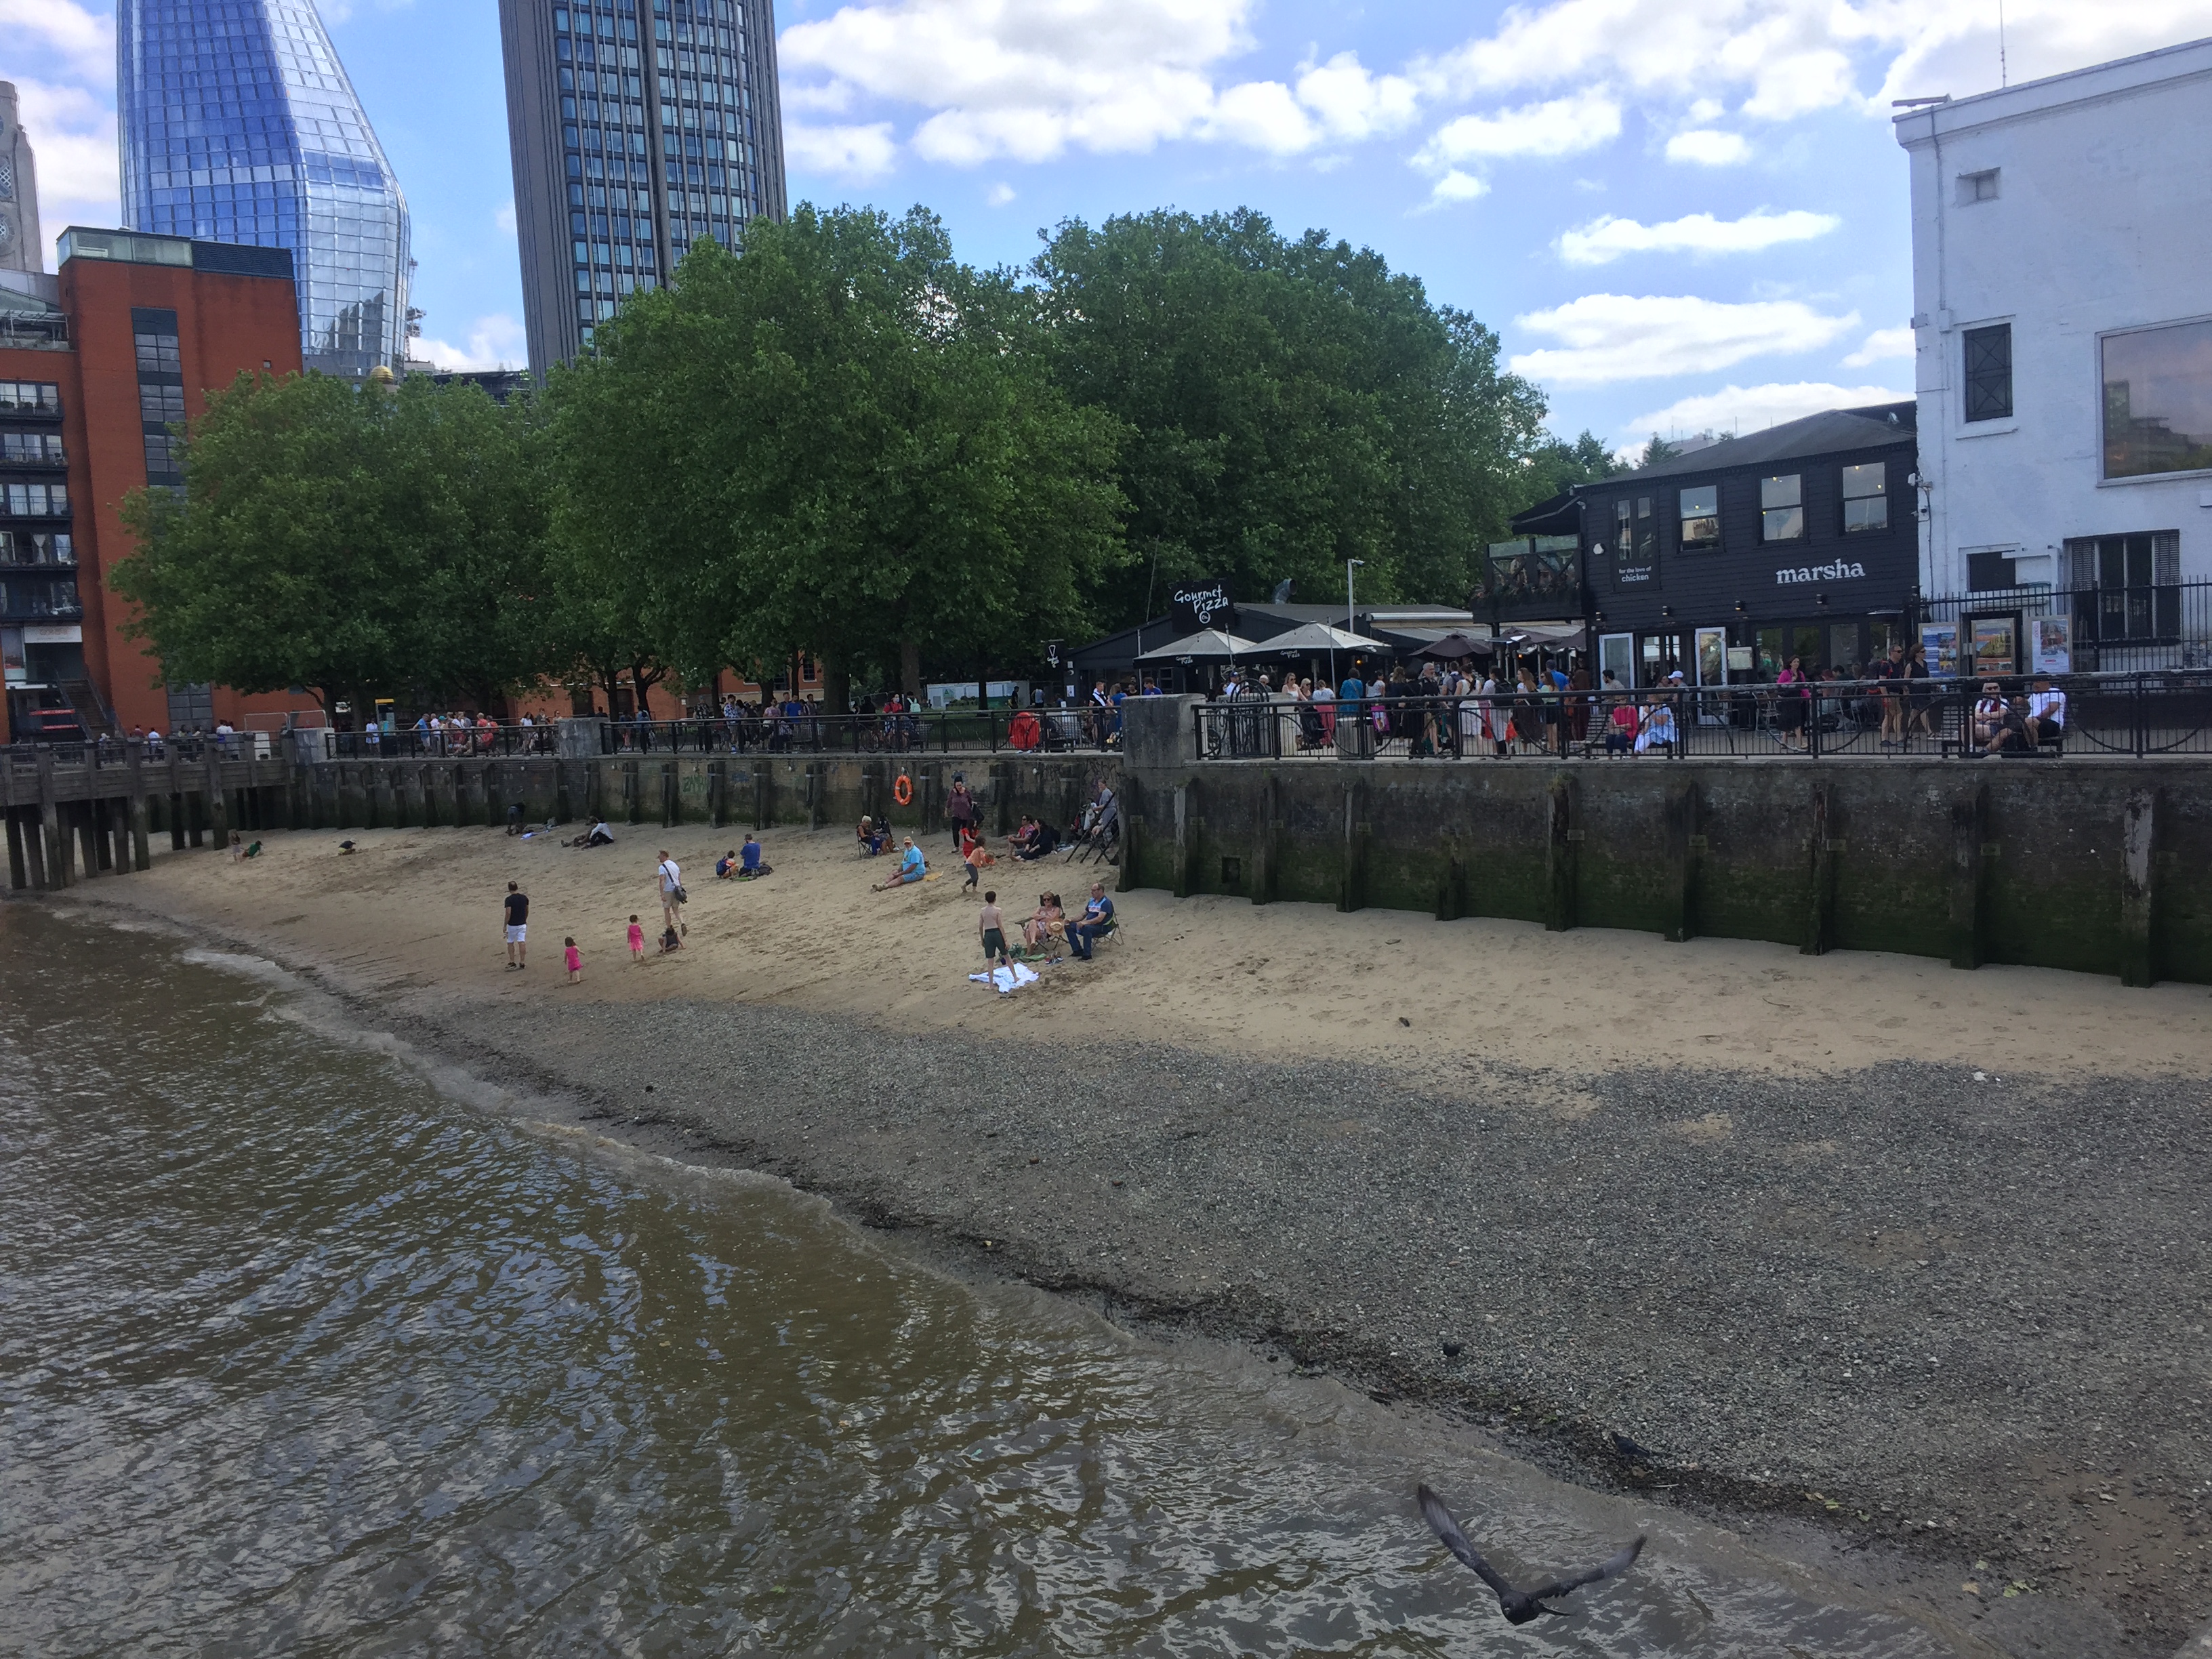 Adults and children on a small beach by the Thames, while lots of people walk along the main path behind them.